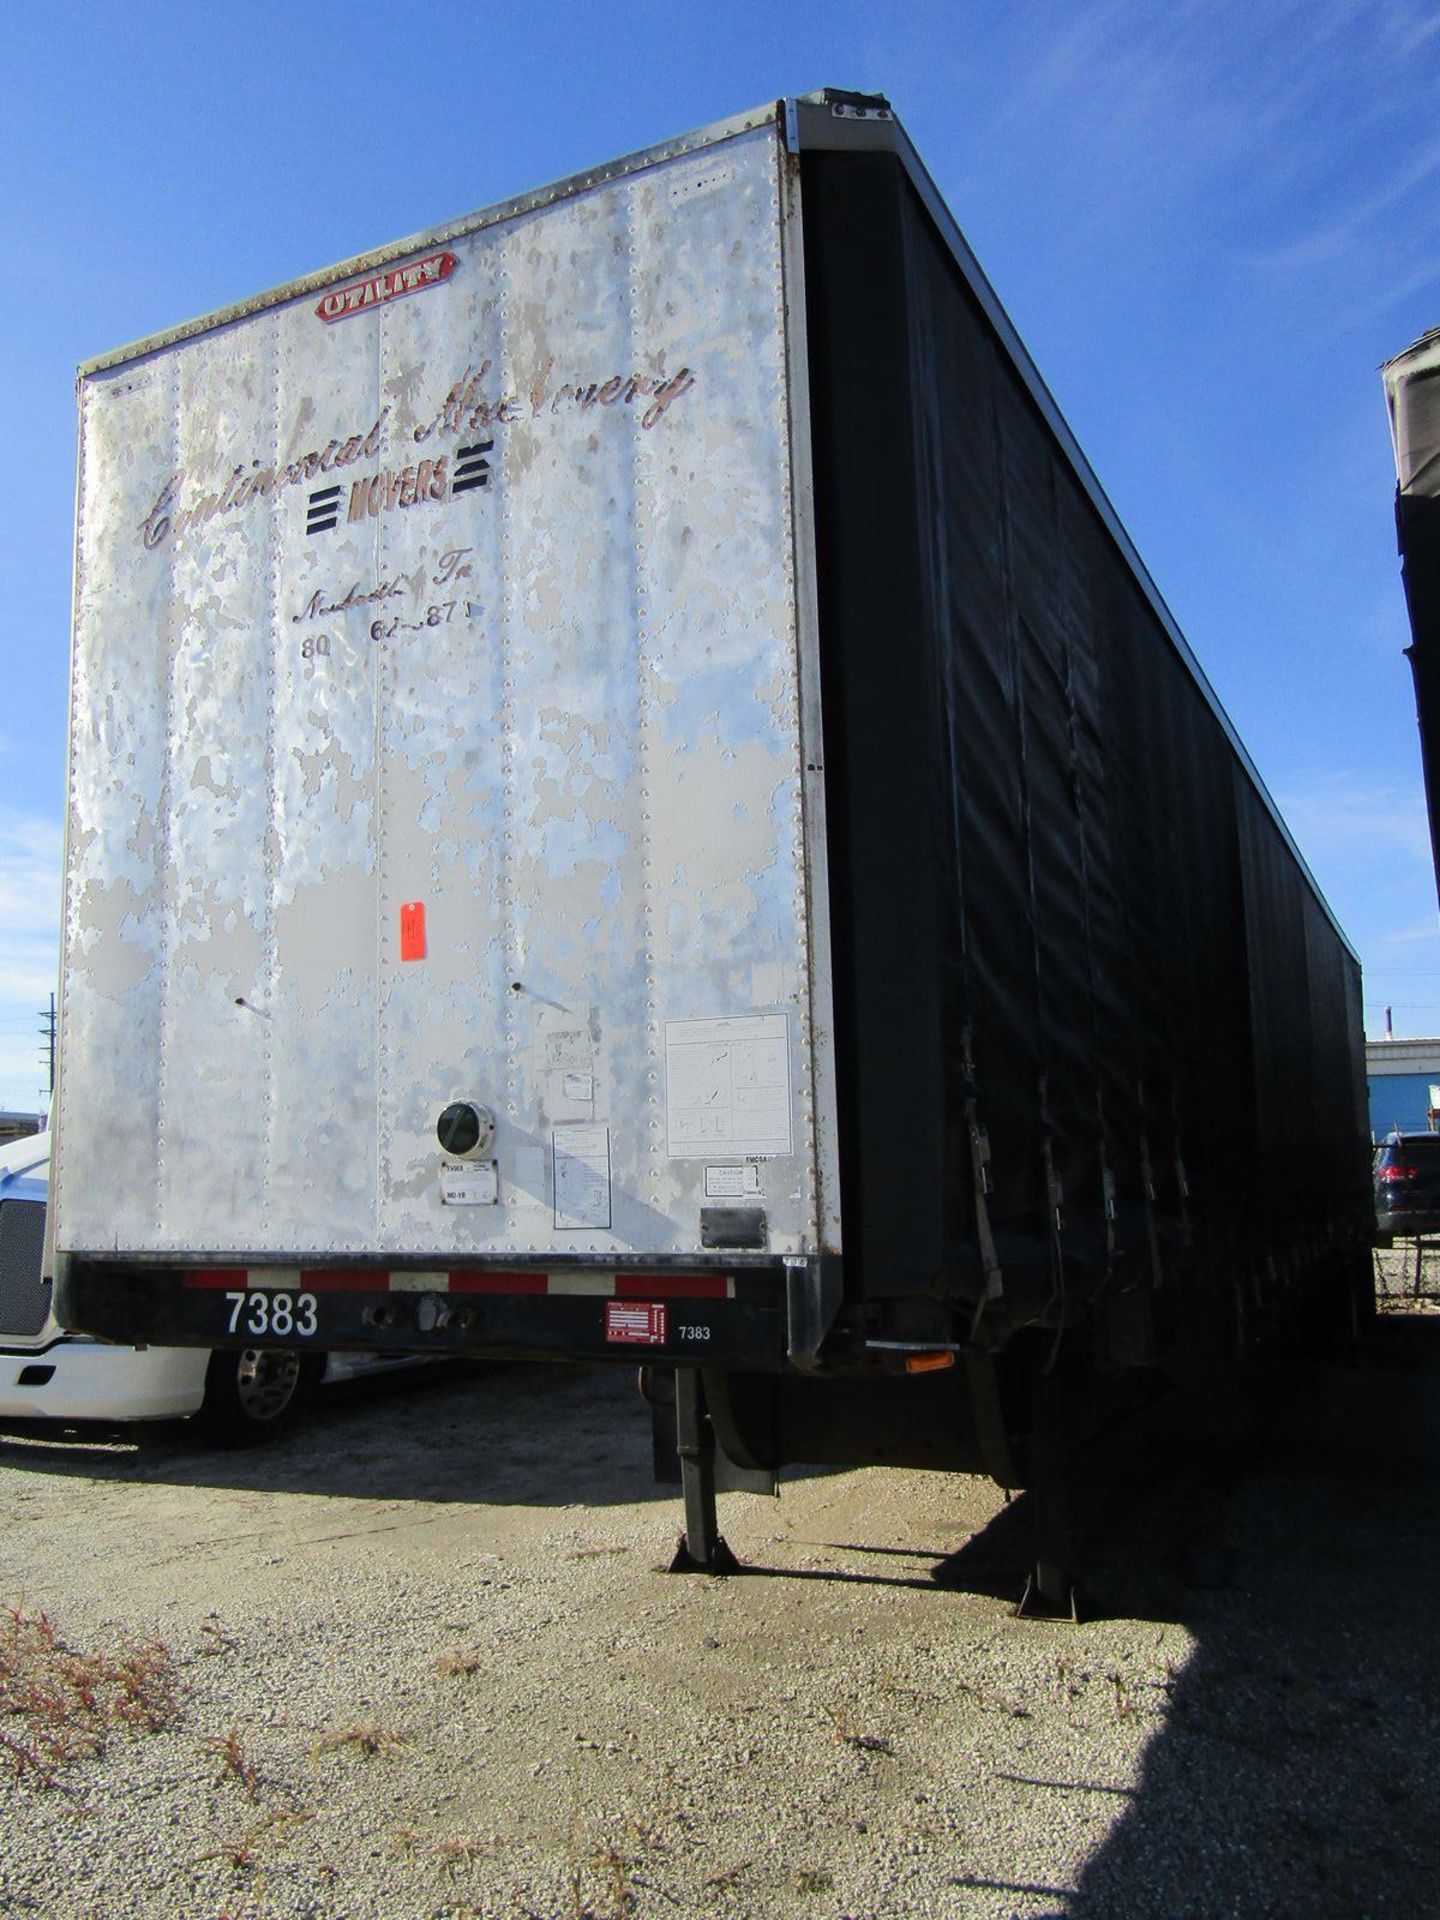 Utility 53 ft. Tautliner Model TS2CDHS Tandem Axle Drop-Deck Curtain Side Semi-Trailer, VIN: 1UY - Image 2 of 7